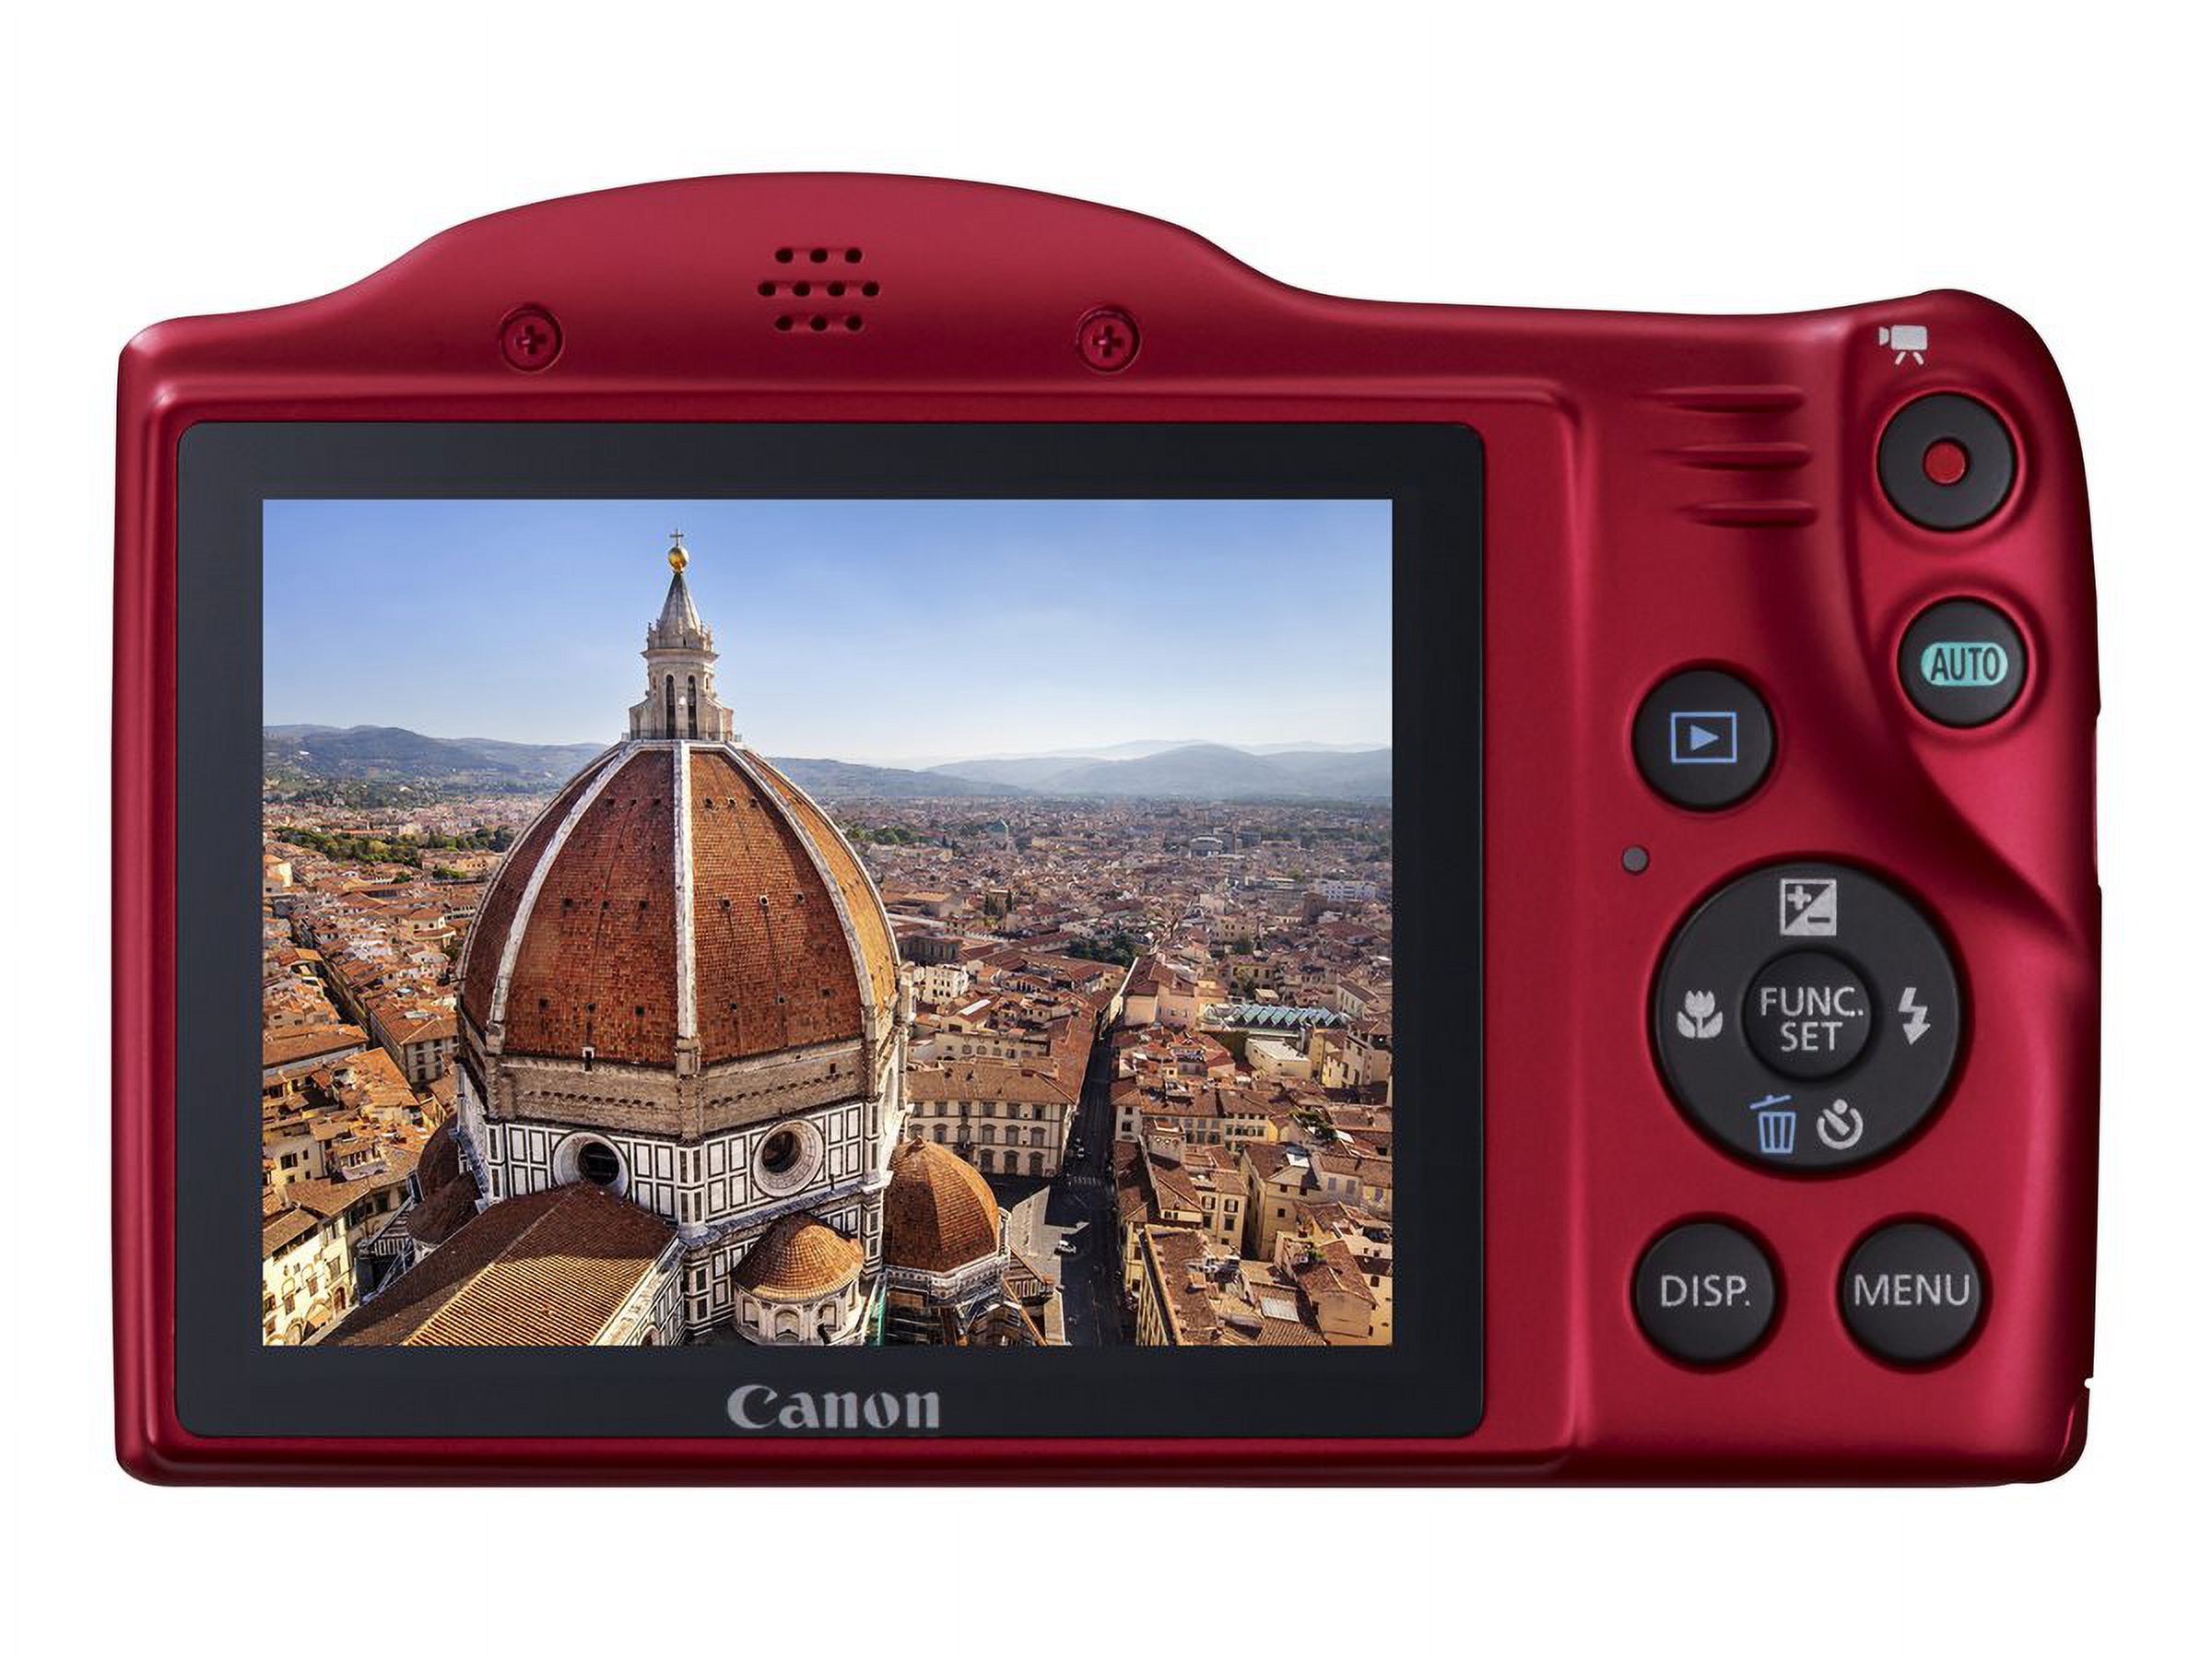 Canon PowerShot SX400 IS - Digital camera - High Definition - compact - 16.0 MP - 30 x optical zoom - red - image 9 of 72